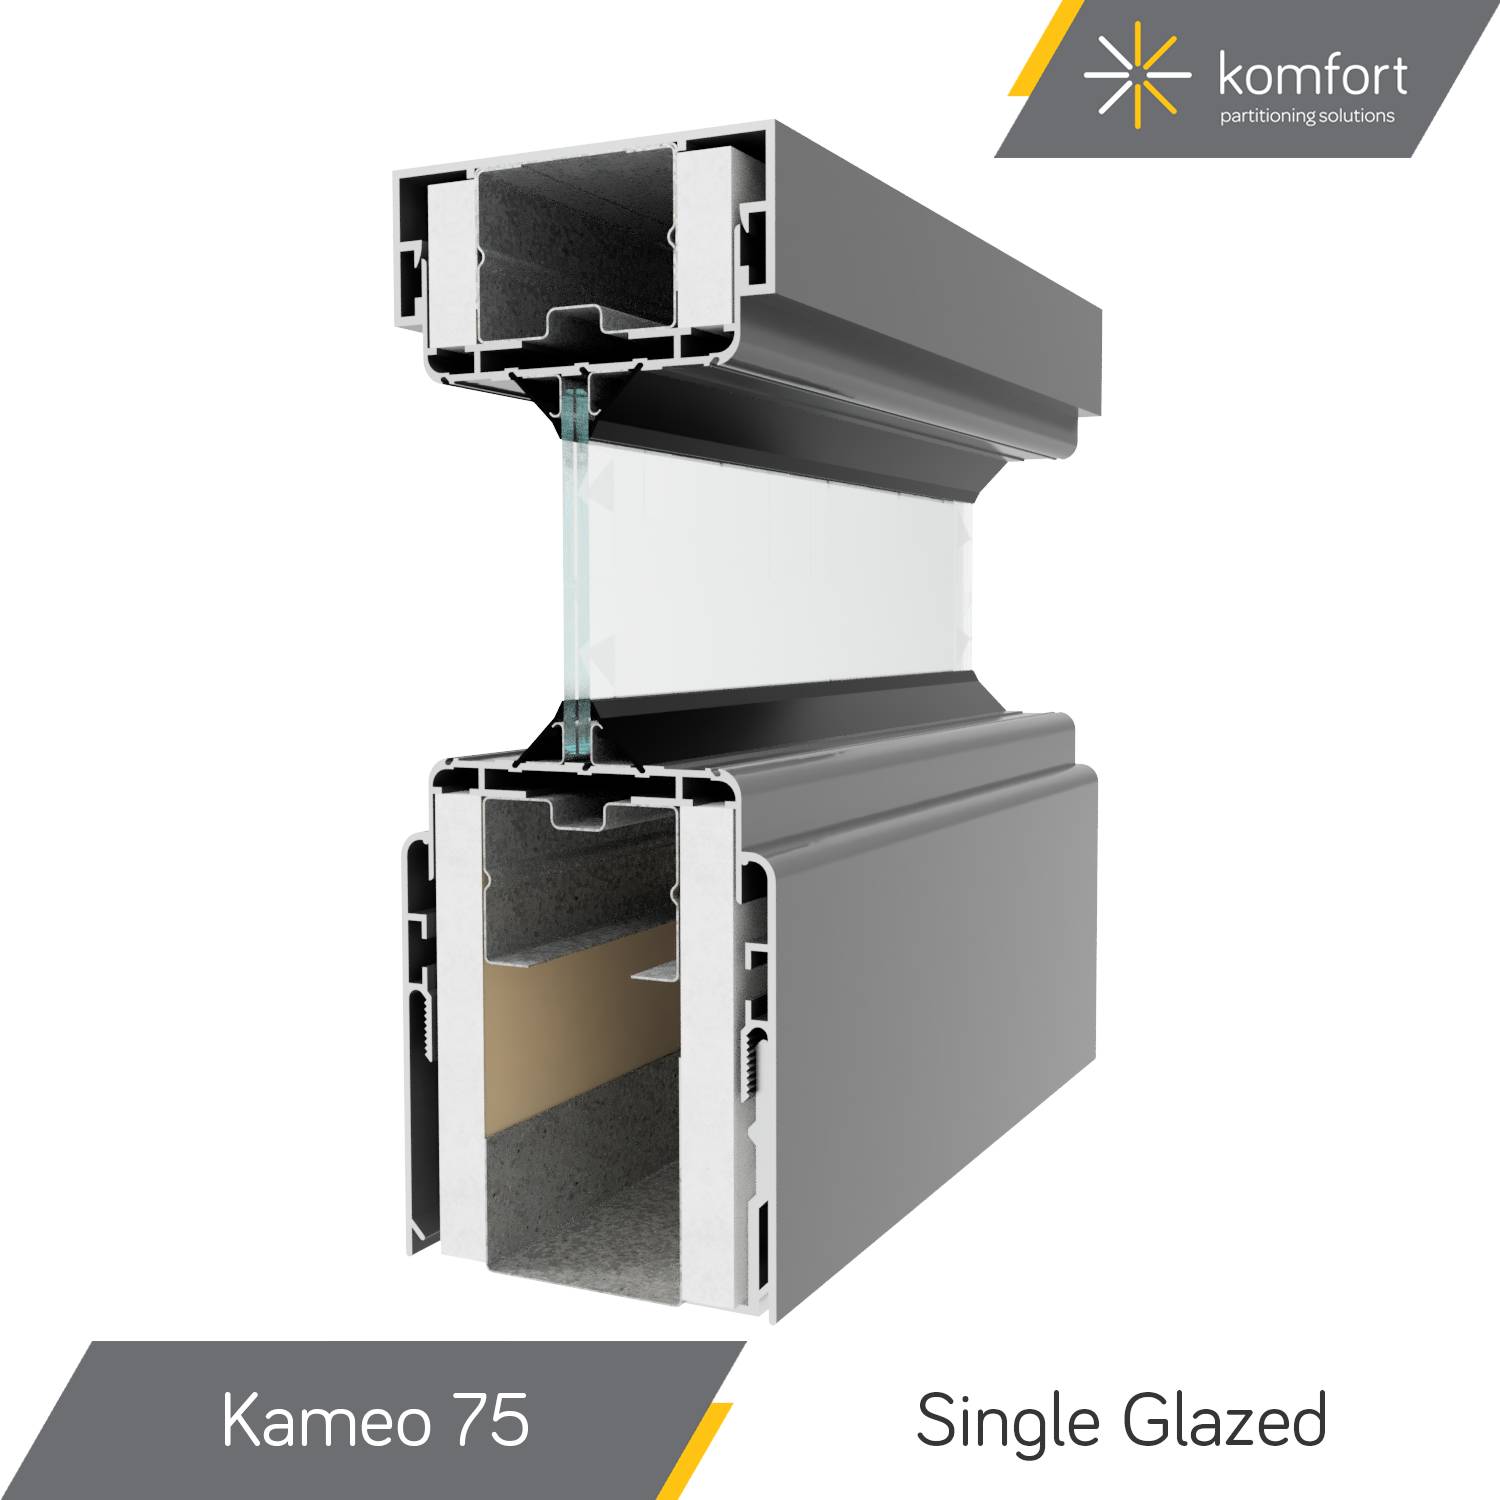 Komfort | Kameo 75 | Non-Fire Rated Solid & Glazed Partitioning